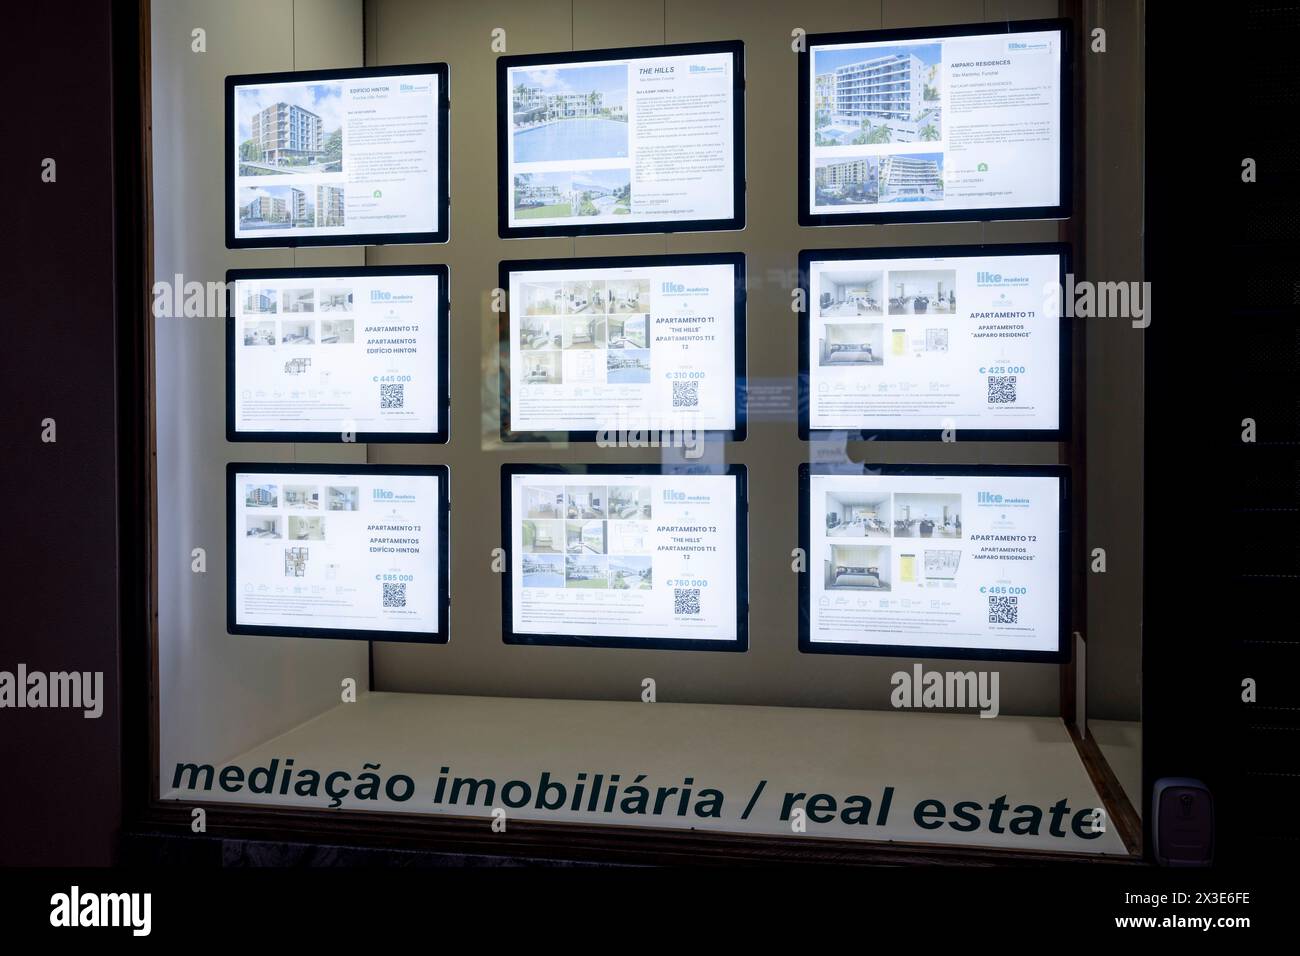 Properties for sale are seen in the window of an estate egent's window, on 18th April 2024, in Funchal, Madeira, Portugal. Stock Photo